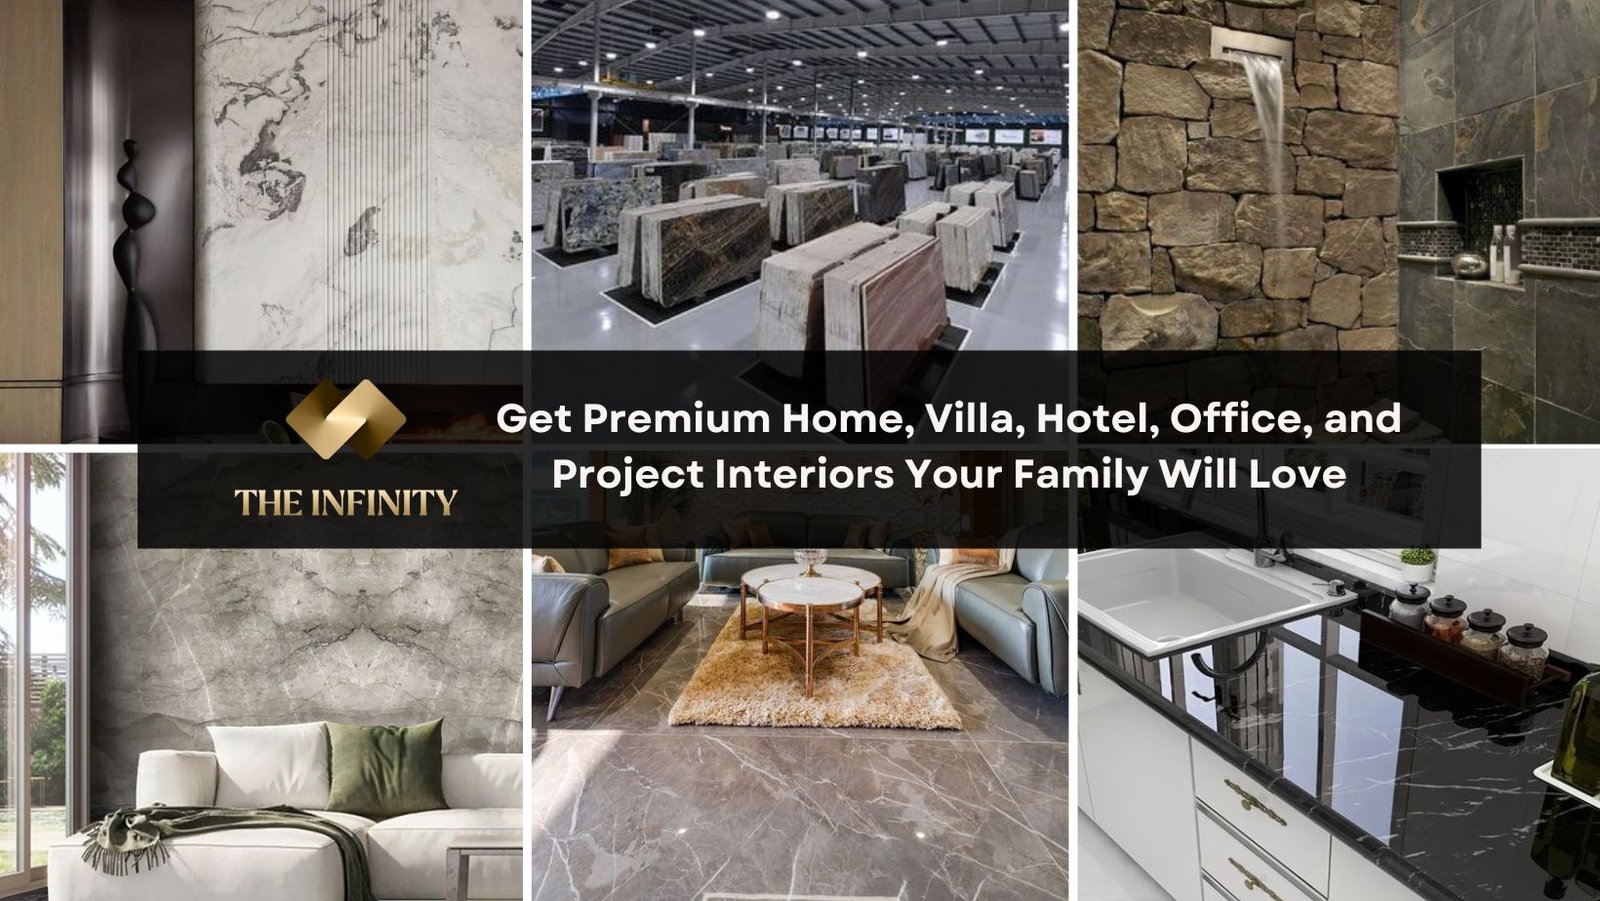 Get Premium Home, Villa, Hotel, Office, and Project Interiors Your Family Will Love